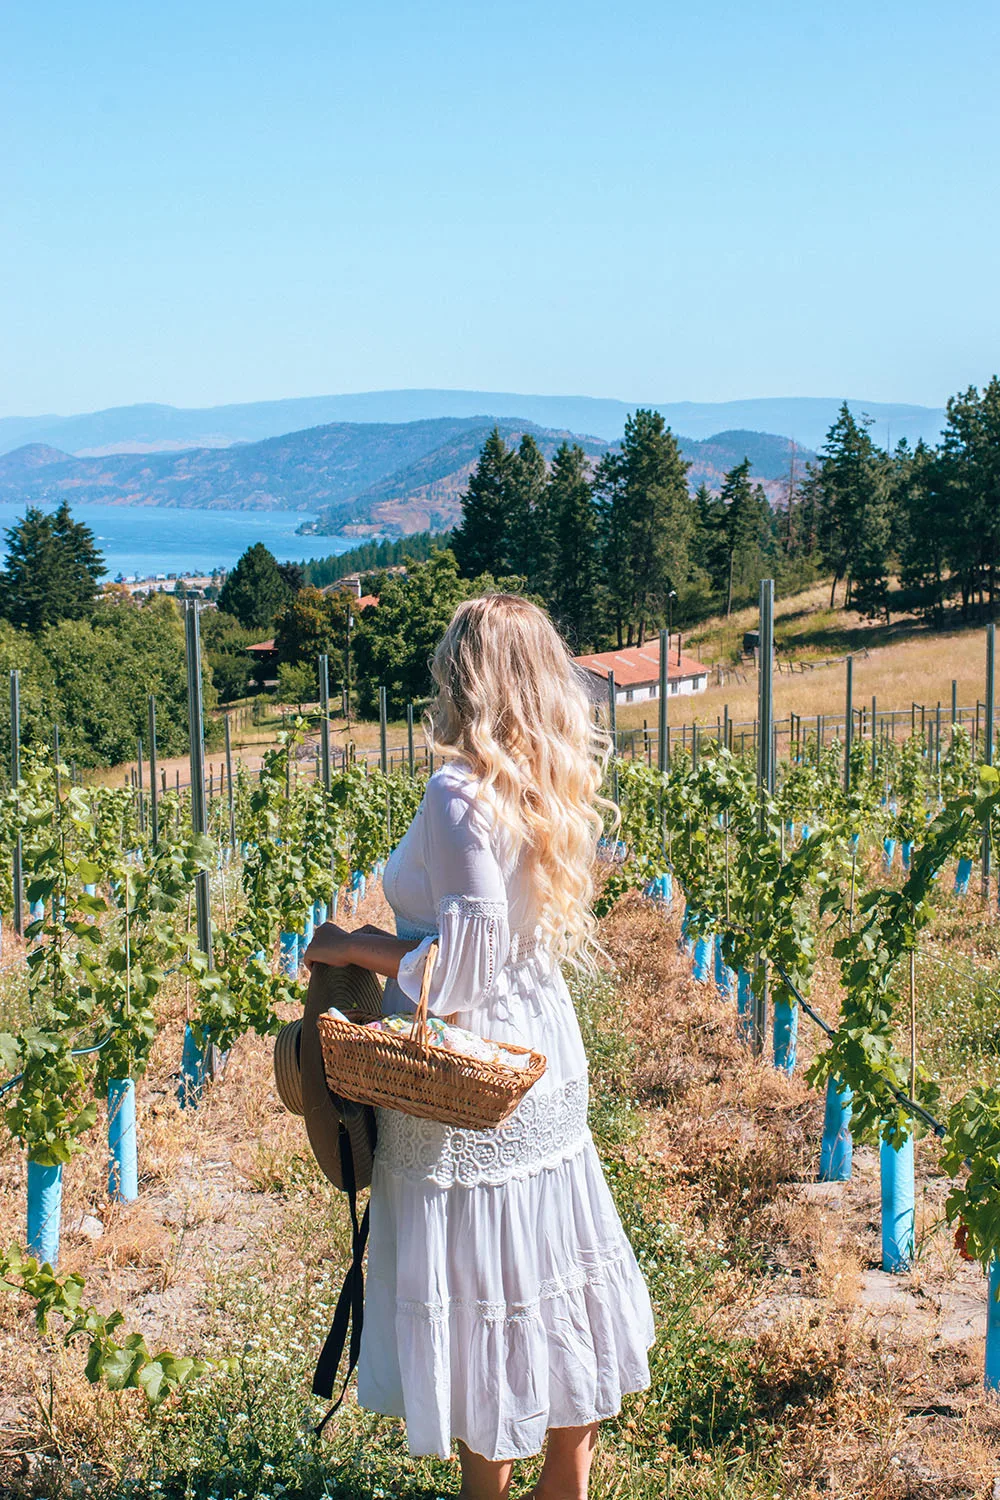 If you're heading to the Okanagan soon and planning on spending time in Kelowna, you don't want to miss this guide to the best wineries in Kelowna! From organic wineries to wineries with the best view, this guide will help you plan your visit to Kelowna’s incredible wine region. Pictured here: Black Swift Vineyards